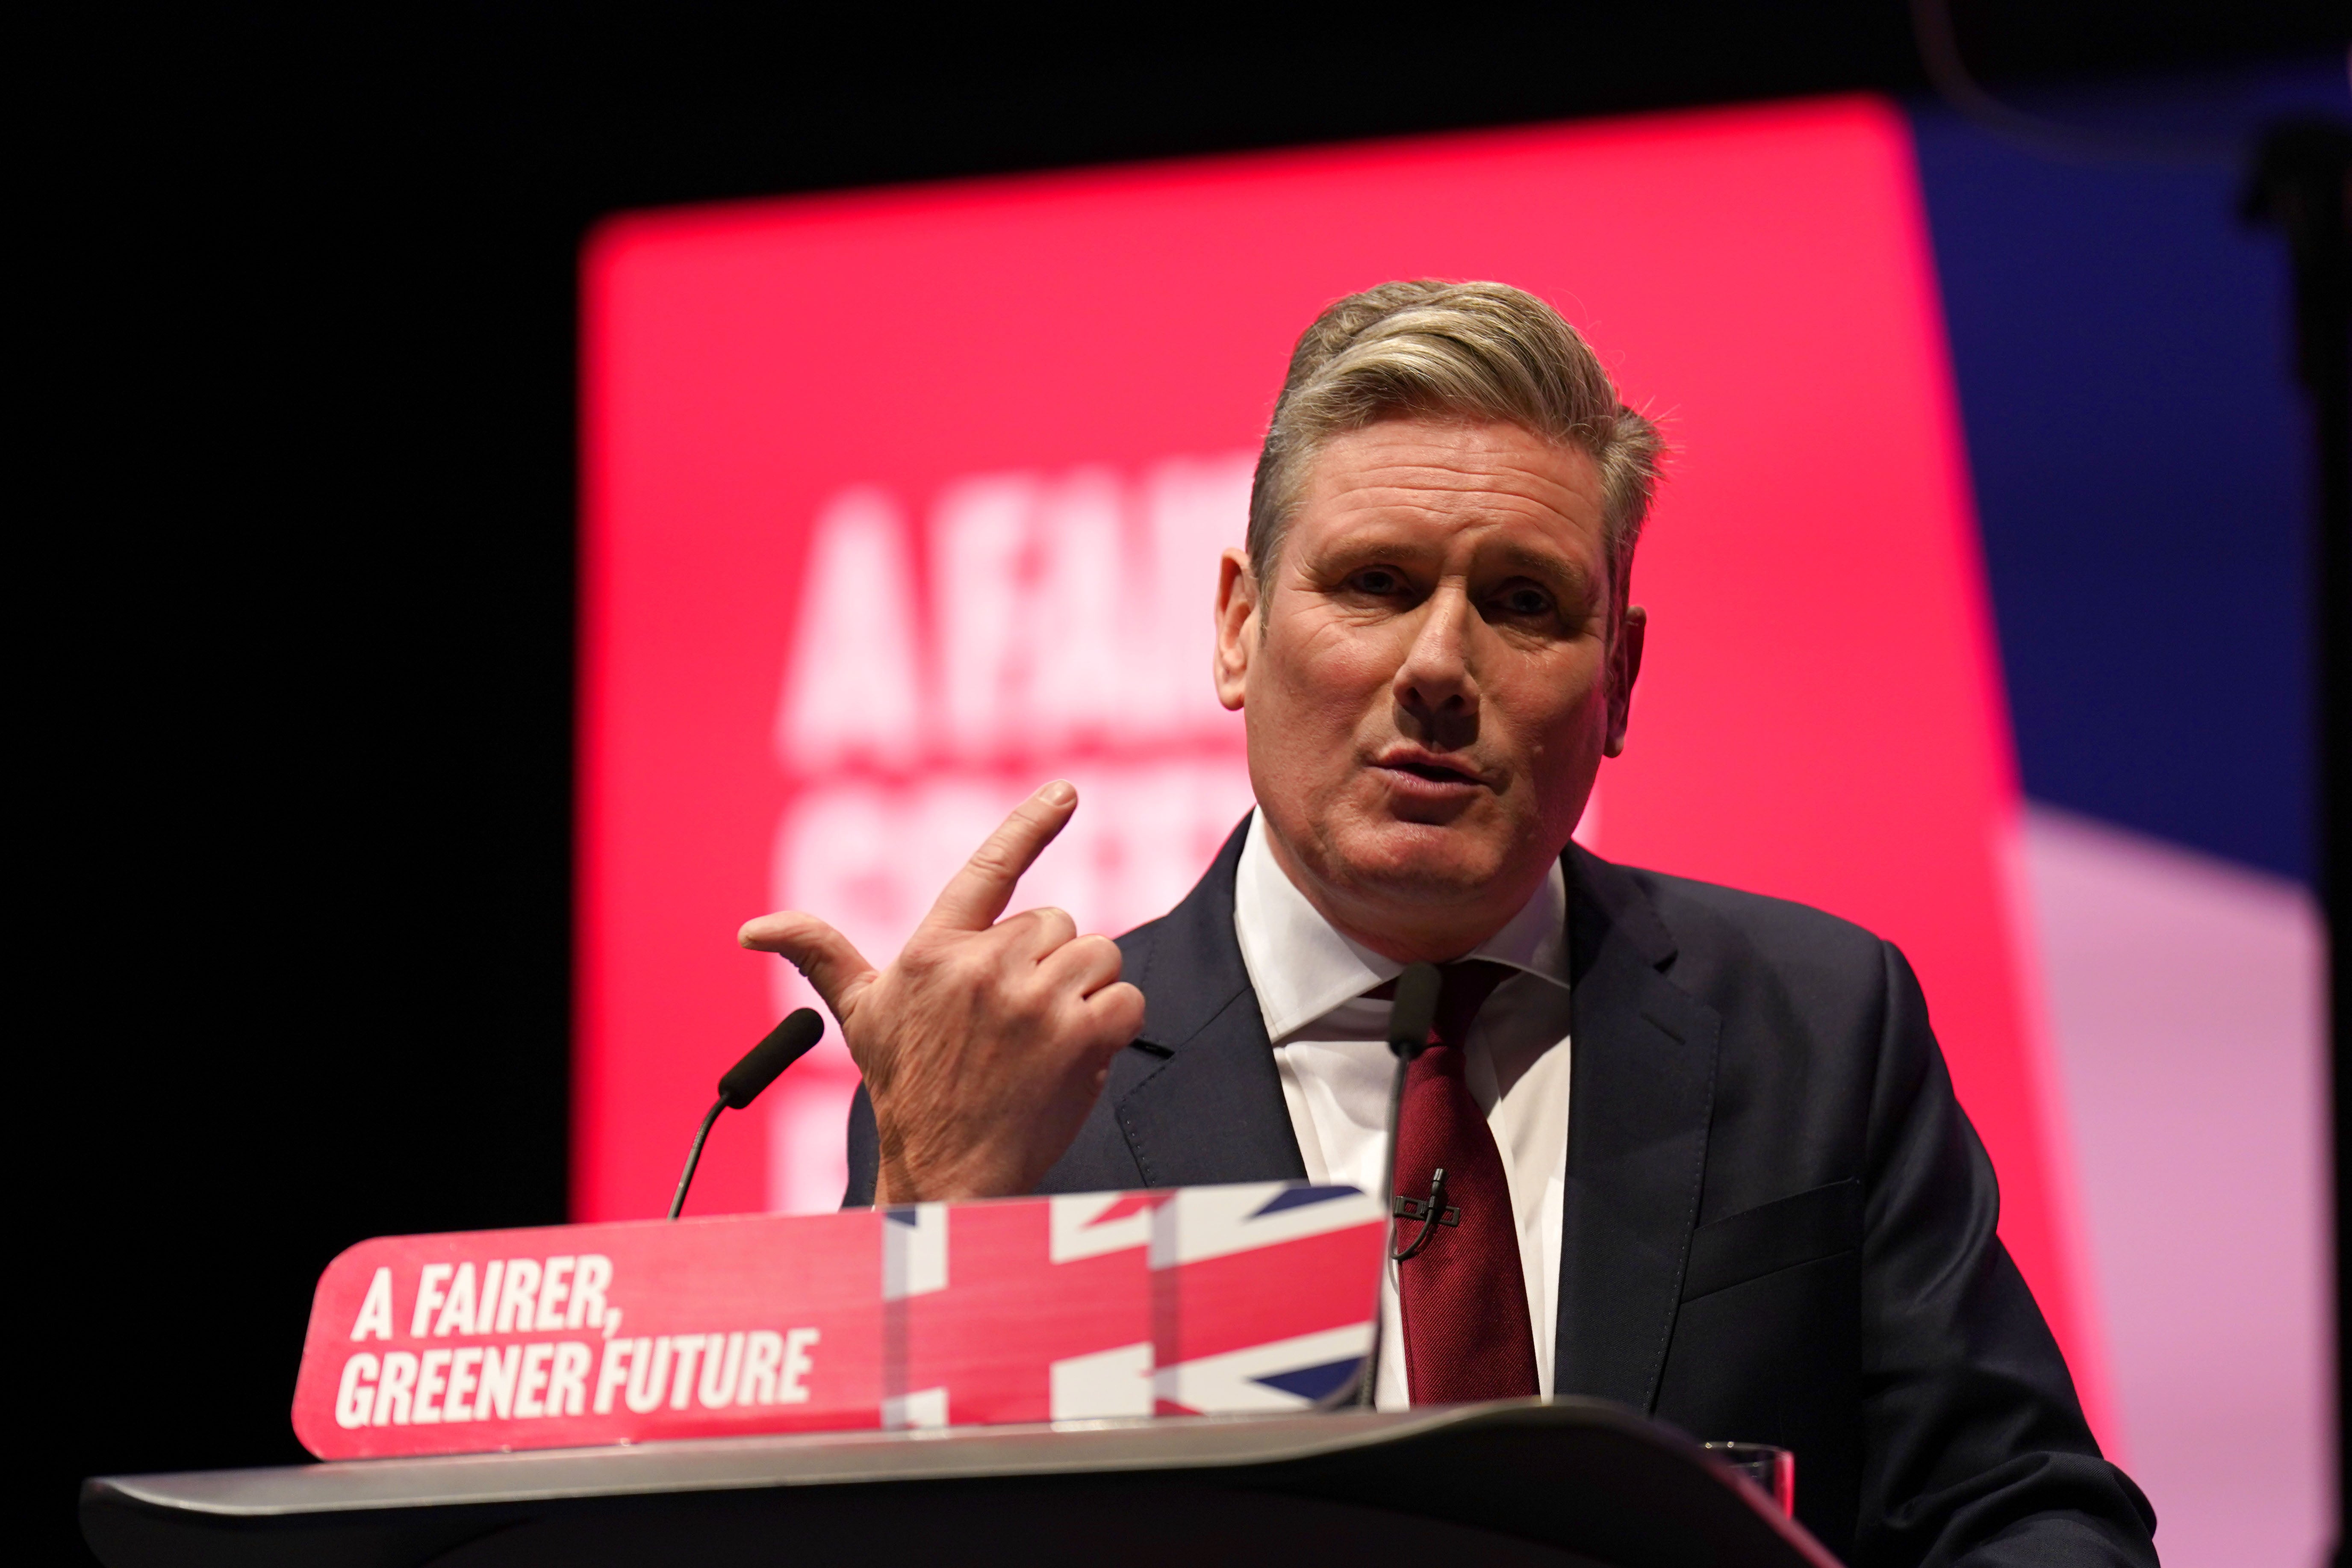 Keir Starmer spoke of Labour’s position in the centre ground